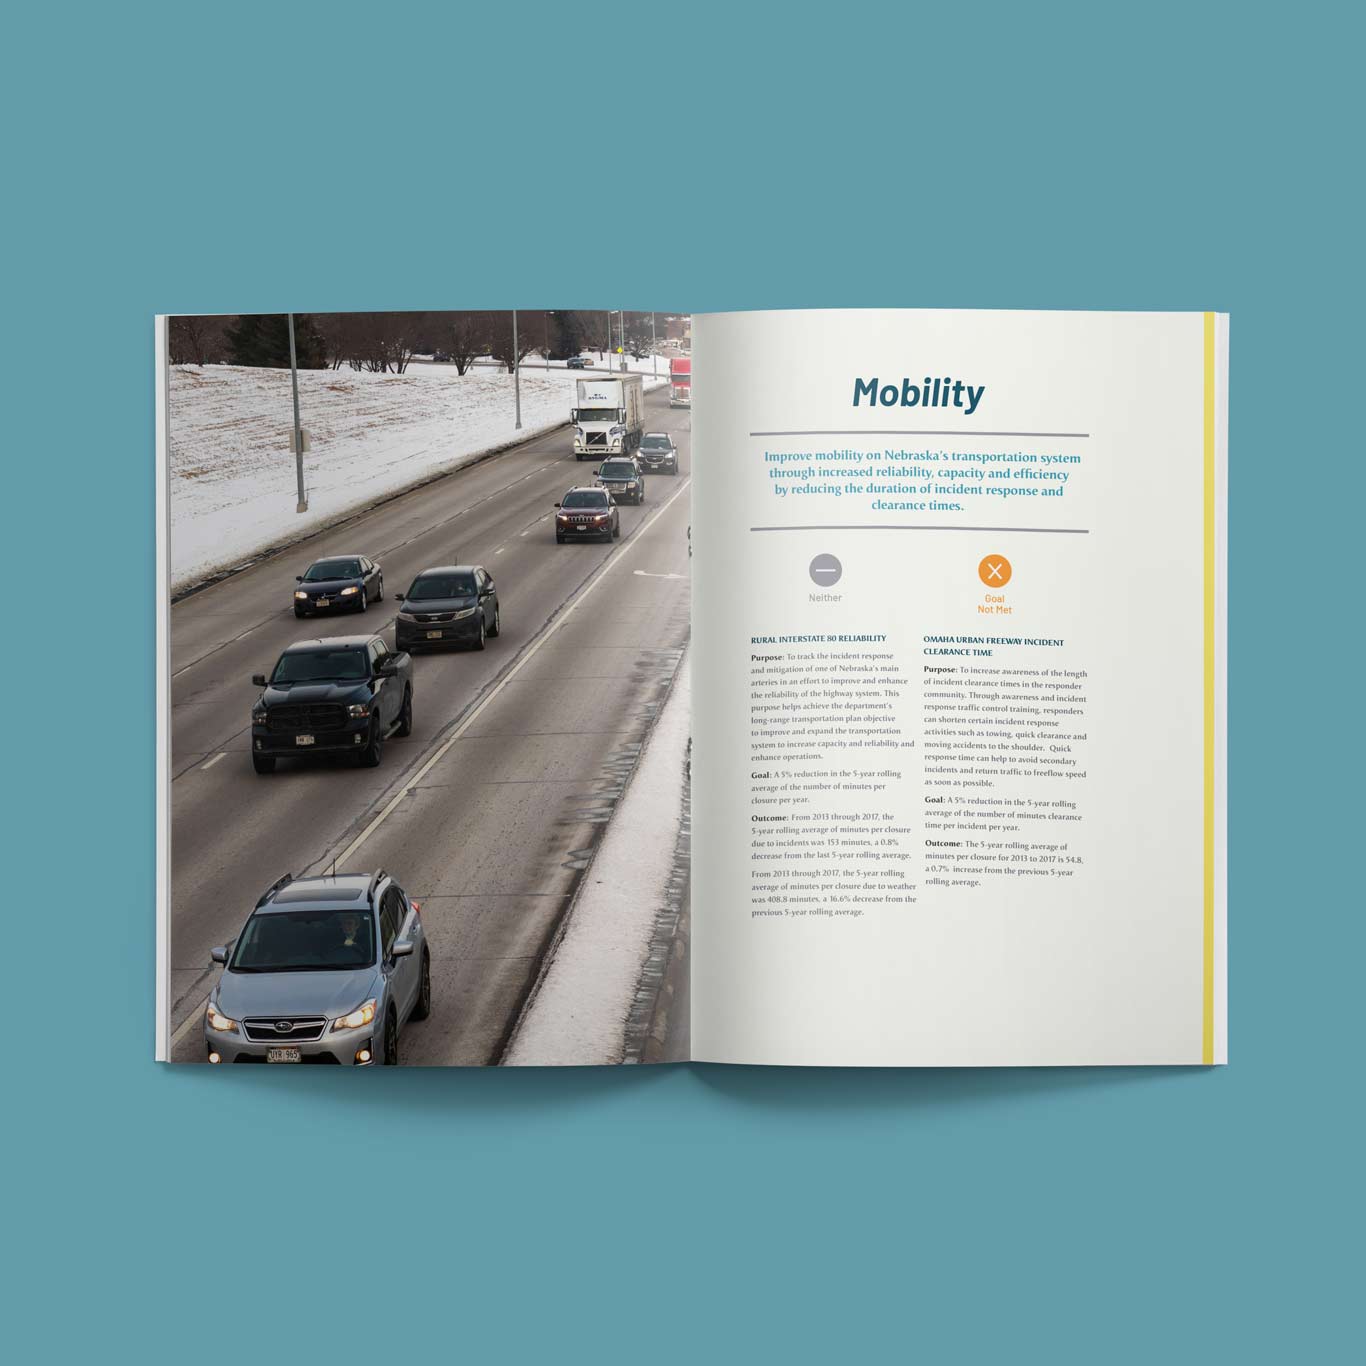 Fifth spread. Utilizes an image of Nebraska Highway 2 for the mobility/smoothness of roads information.